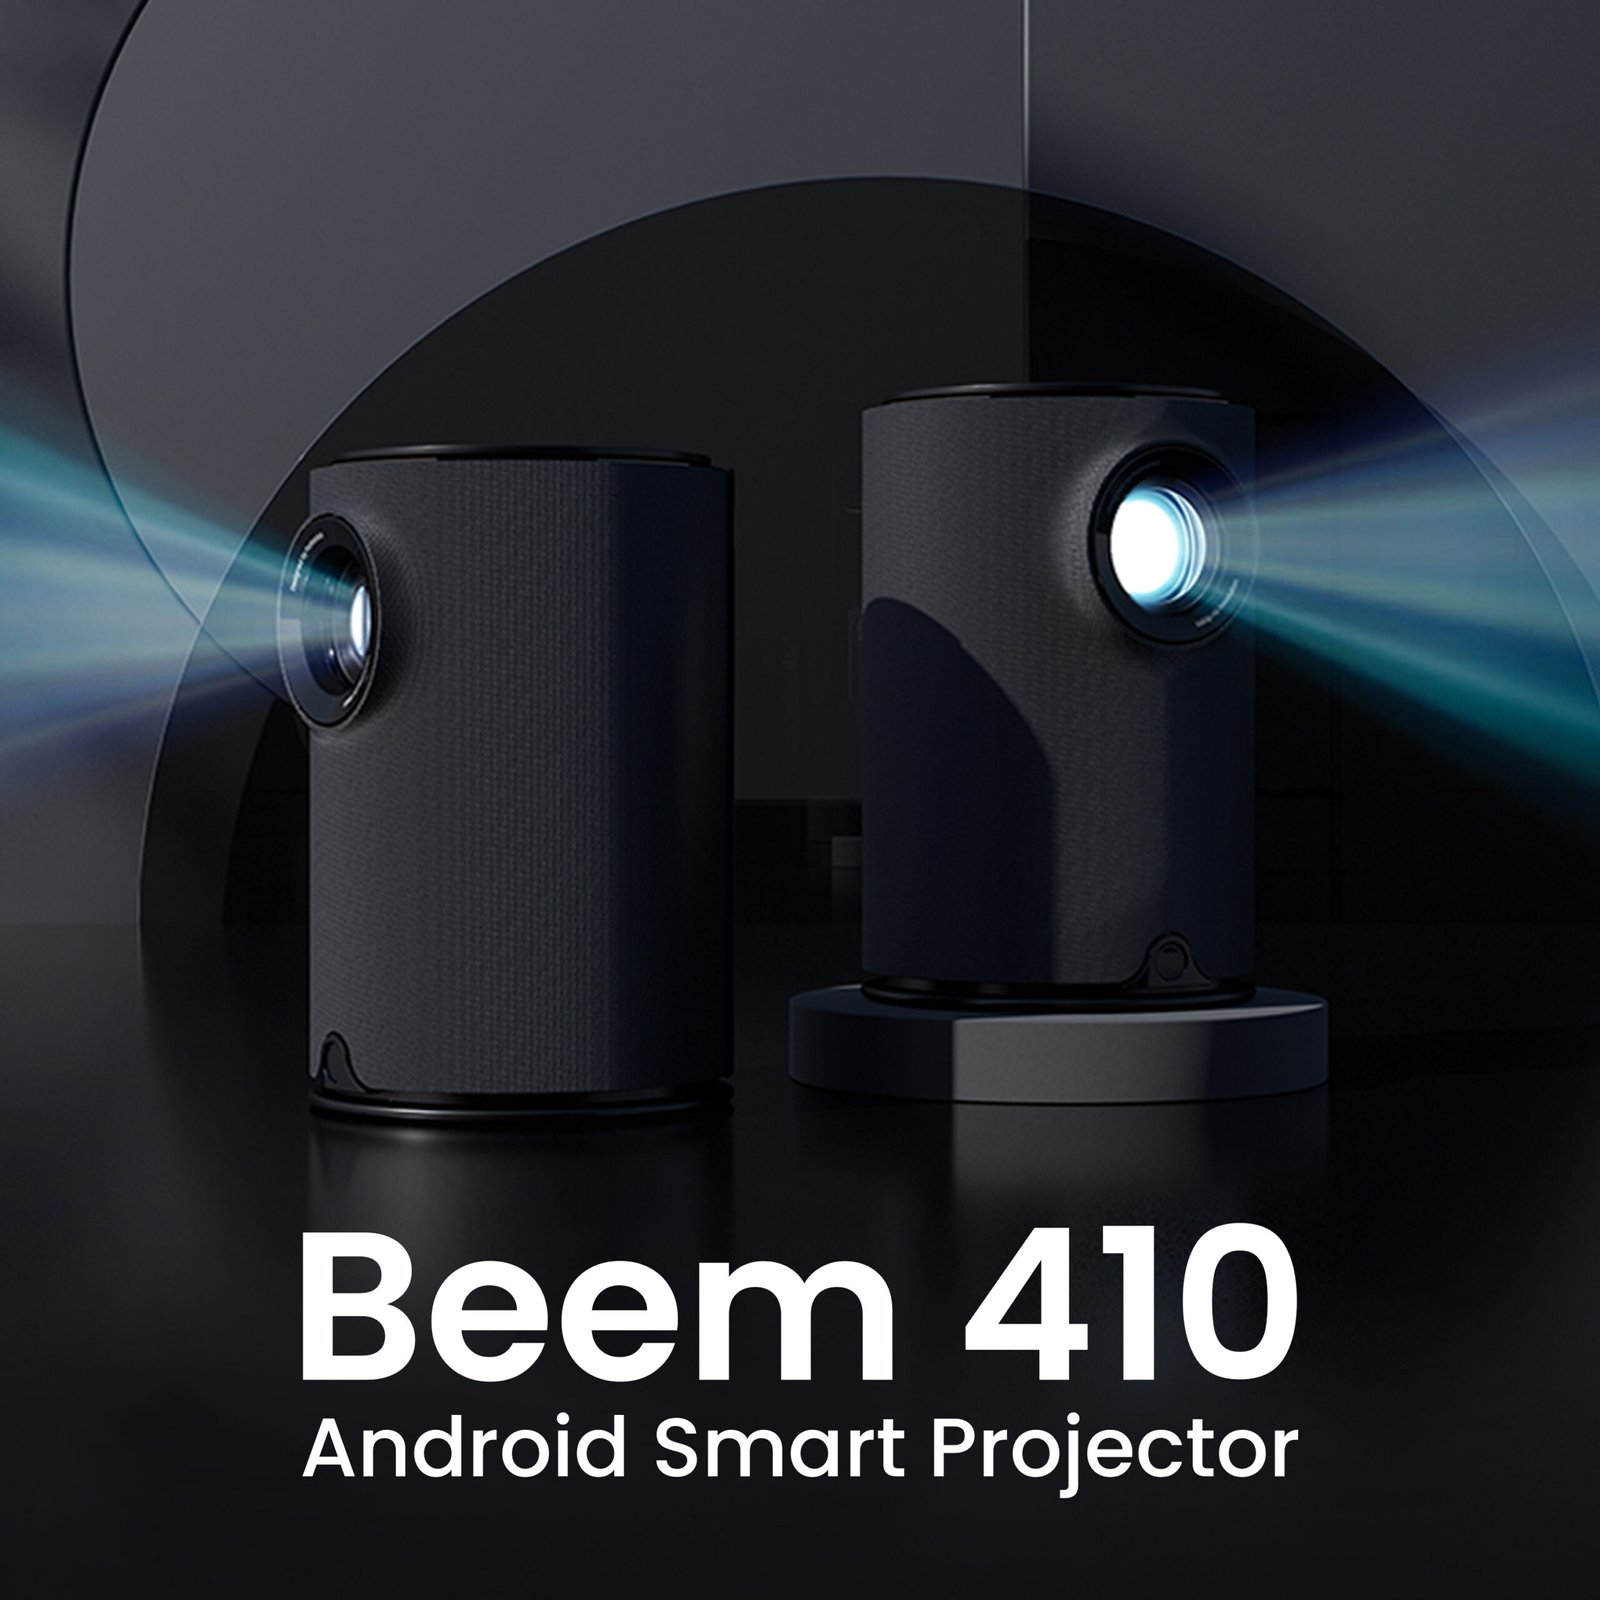 Portronics Introduces ‘Beem 410’ Smart Portable Android Projector